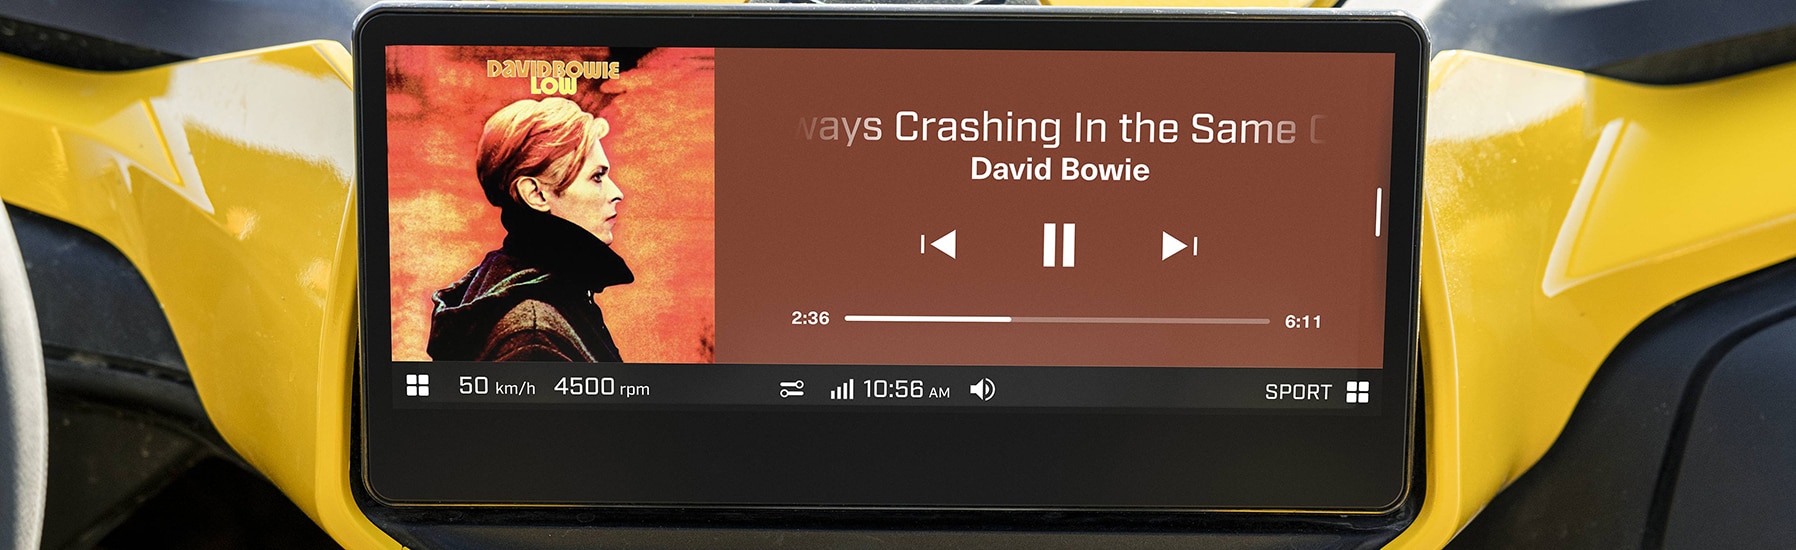 Touch display inside the Maverick R displaying music 